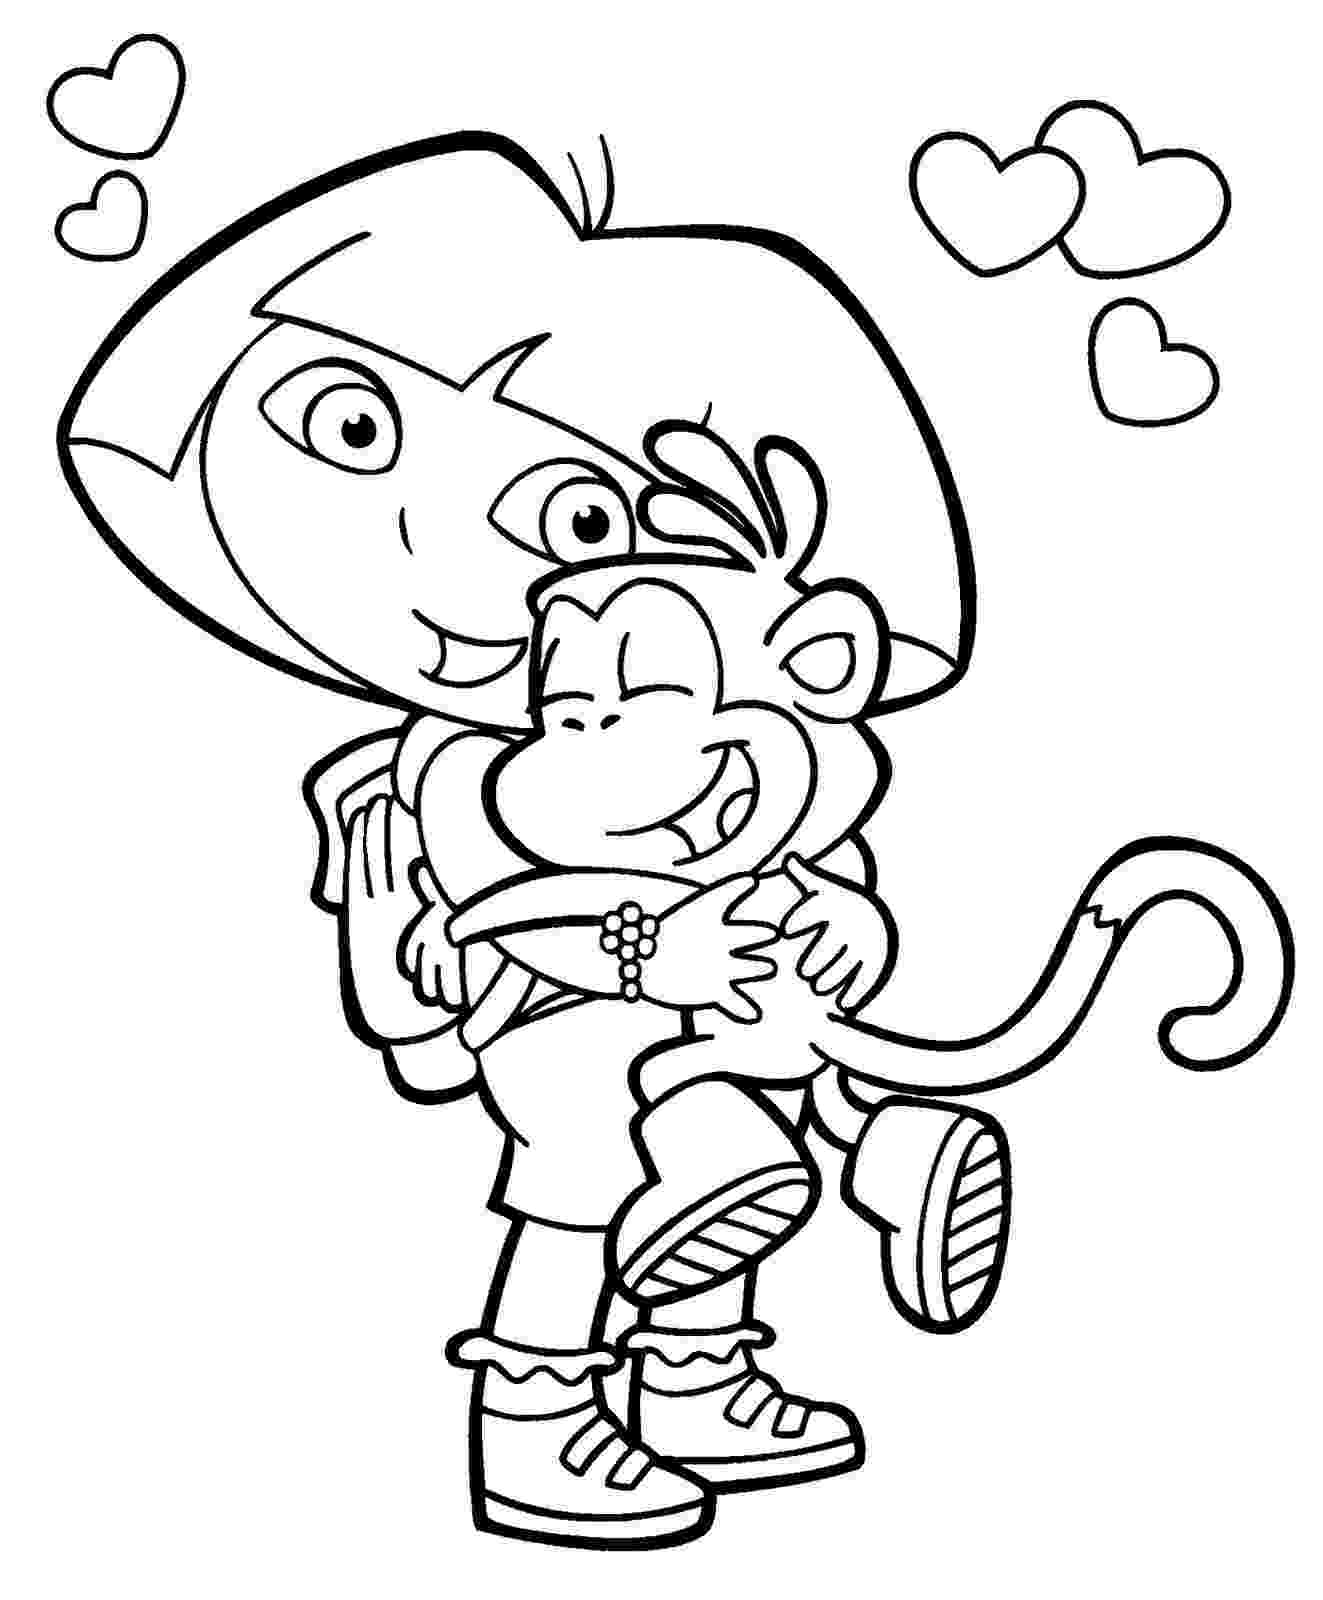 dora colouring dora and boots coloring pages to download and print for free dora colouring 